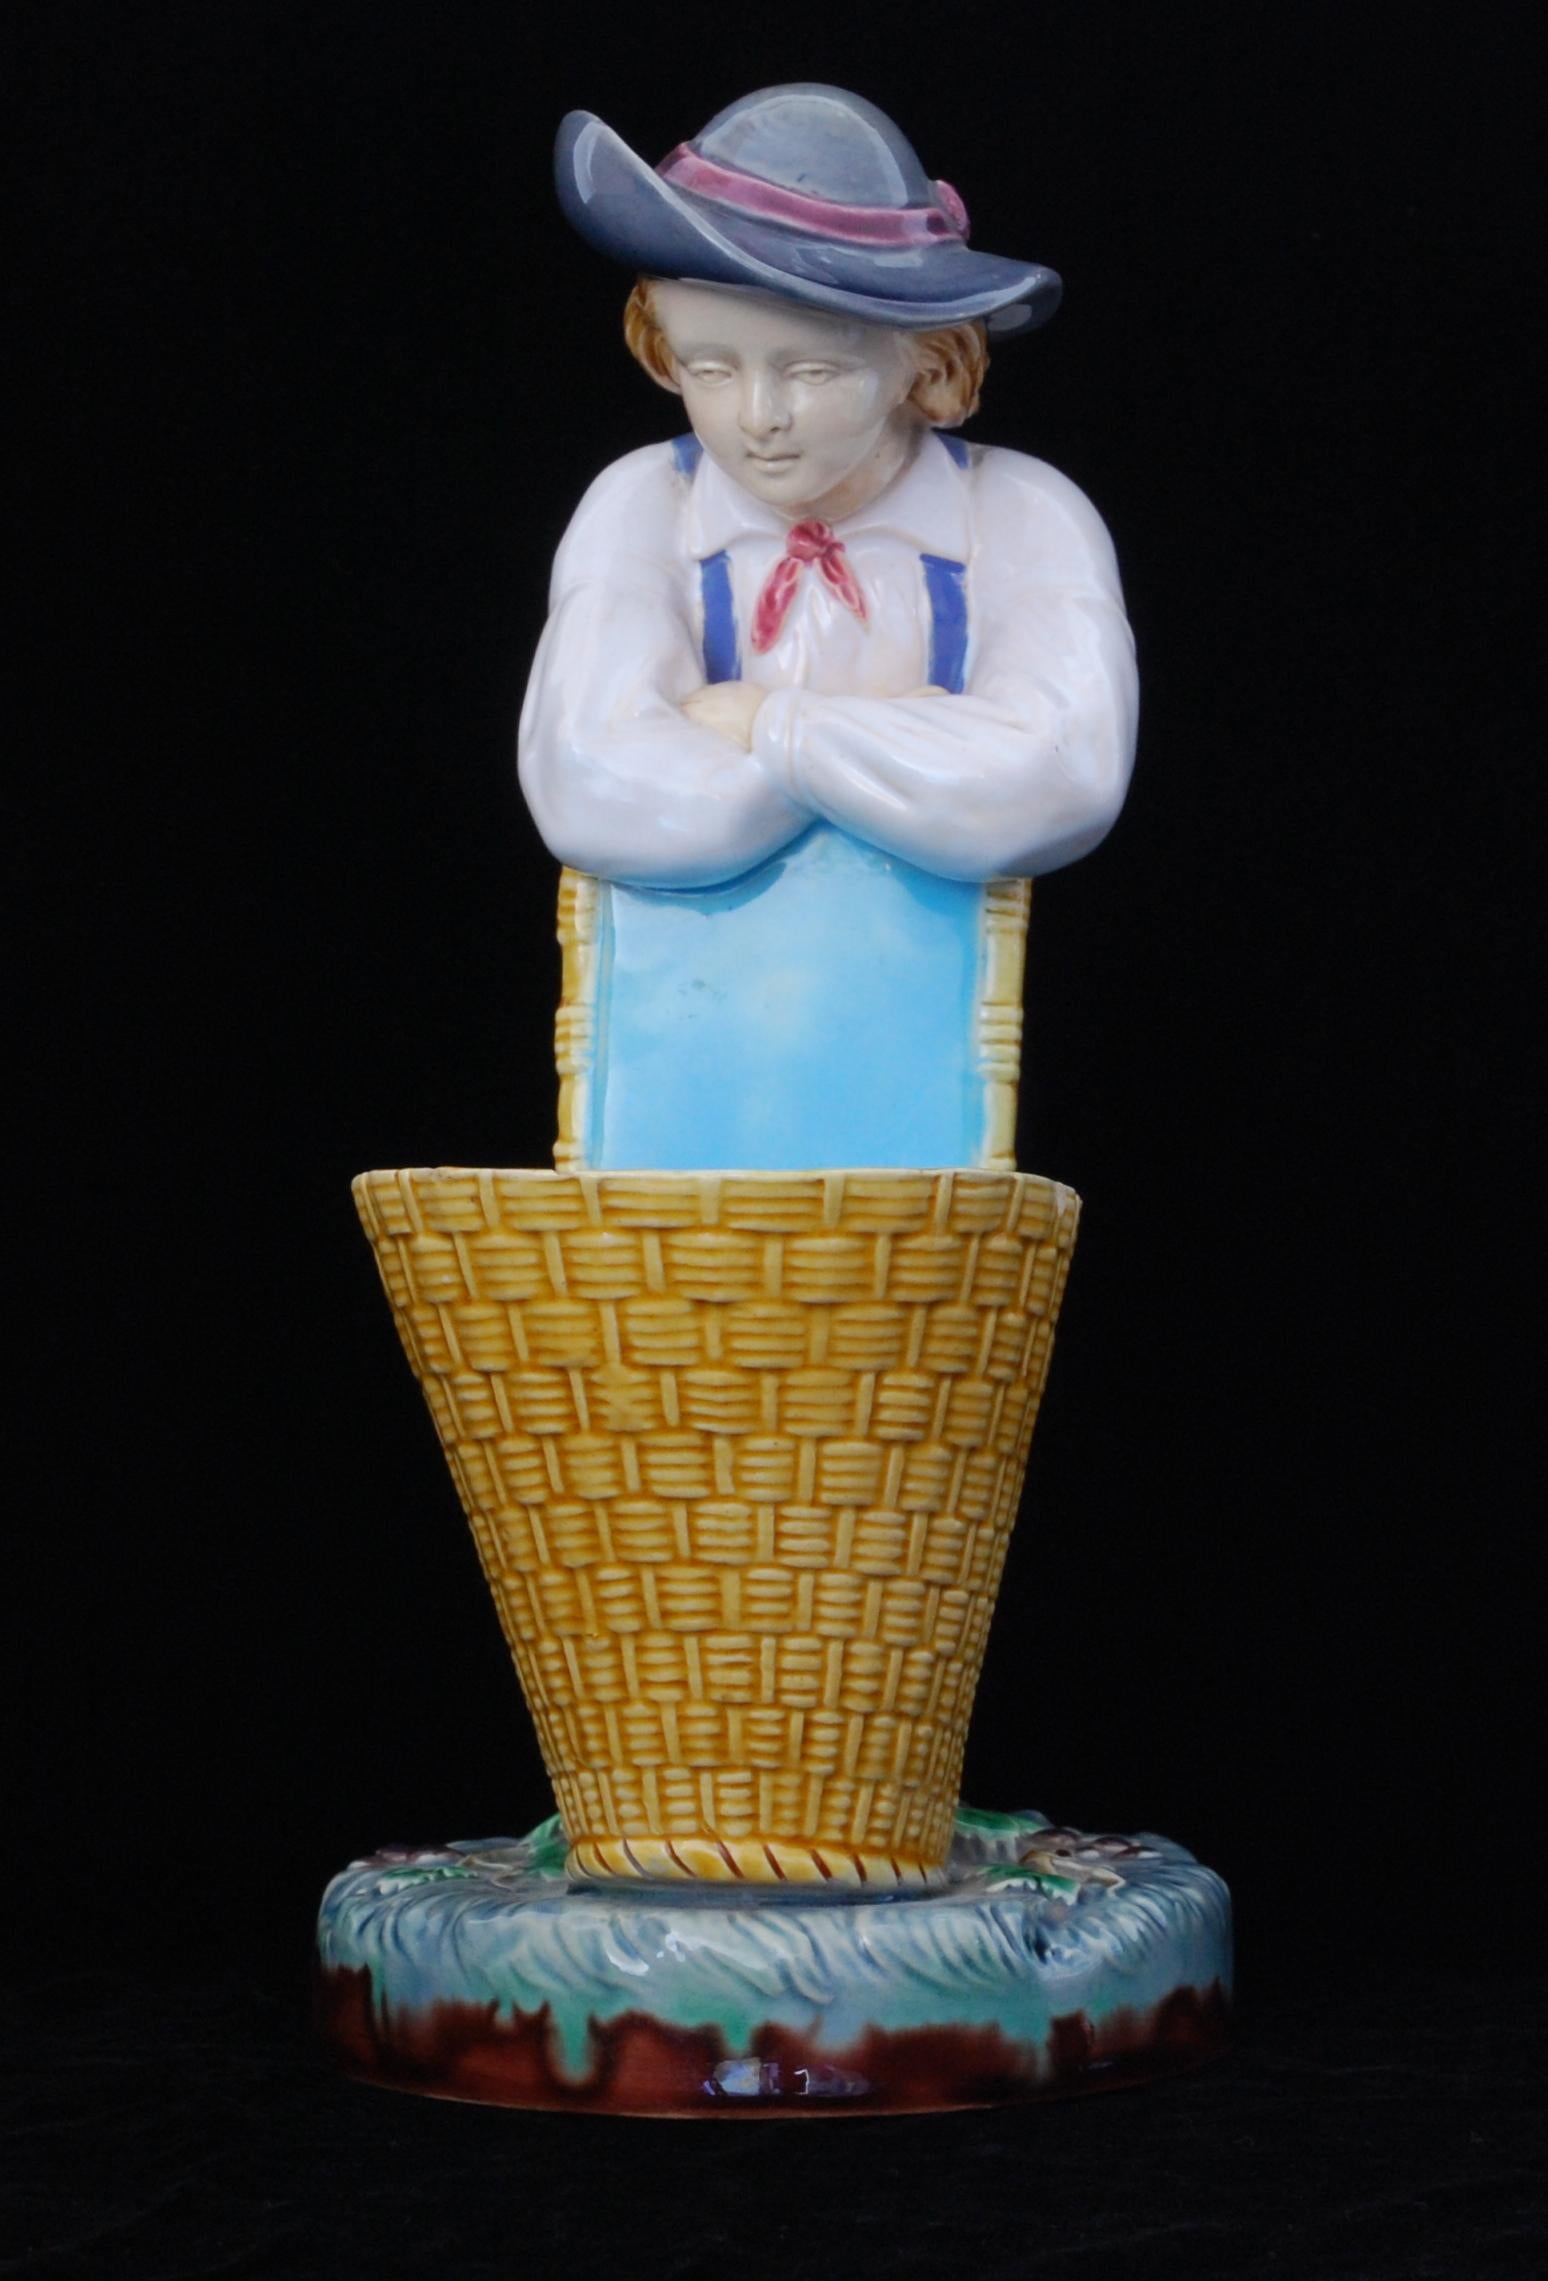 A brightly coloured majolica sweetmeat dish in the form of a bucolic young man leaning on a basket.

Minton majolica is a type of ceramic ware that was produced by the Minton pottery in the 19th century. It was created in response to the growing